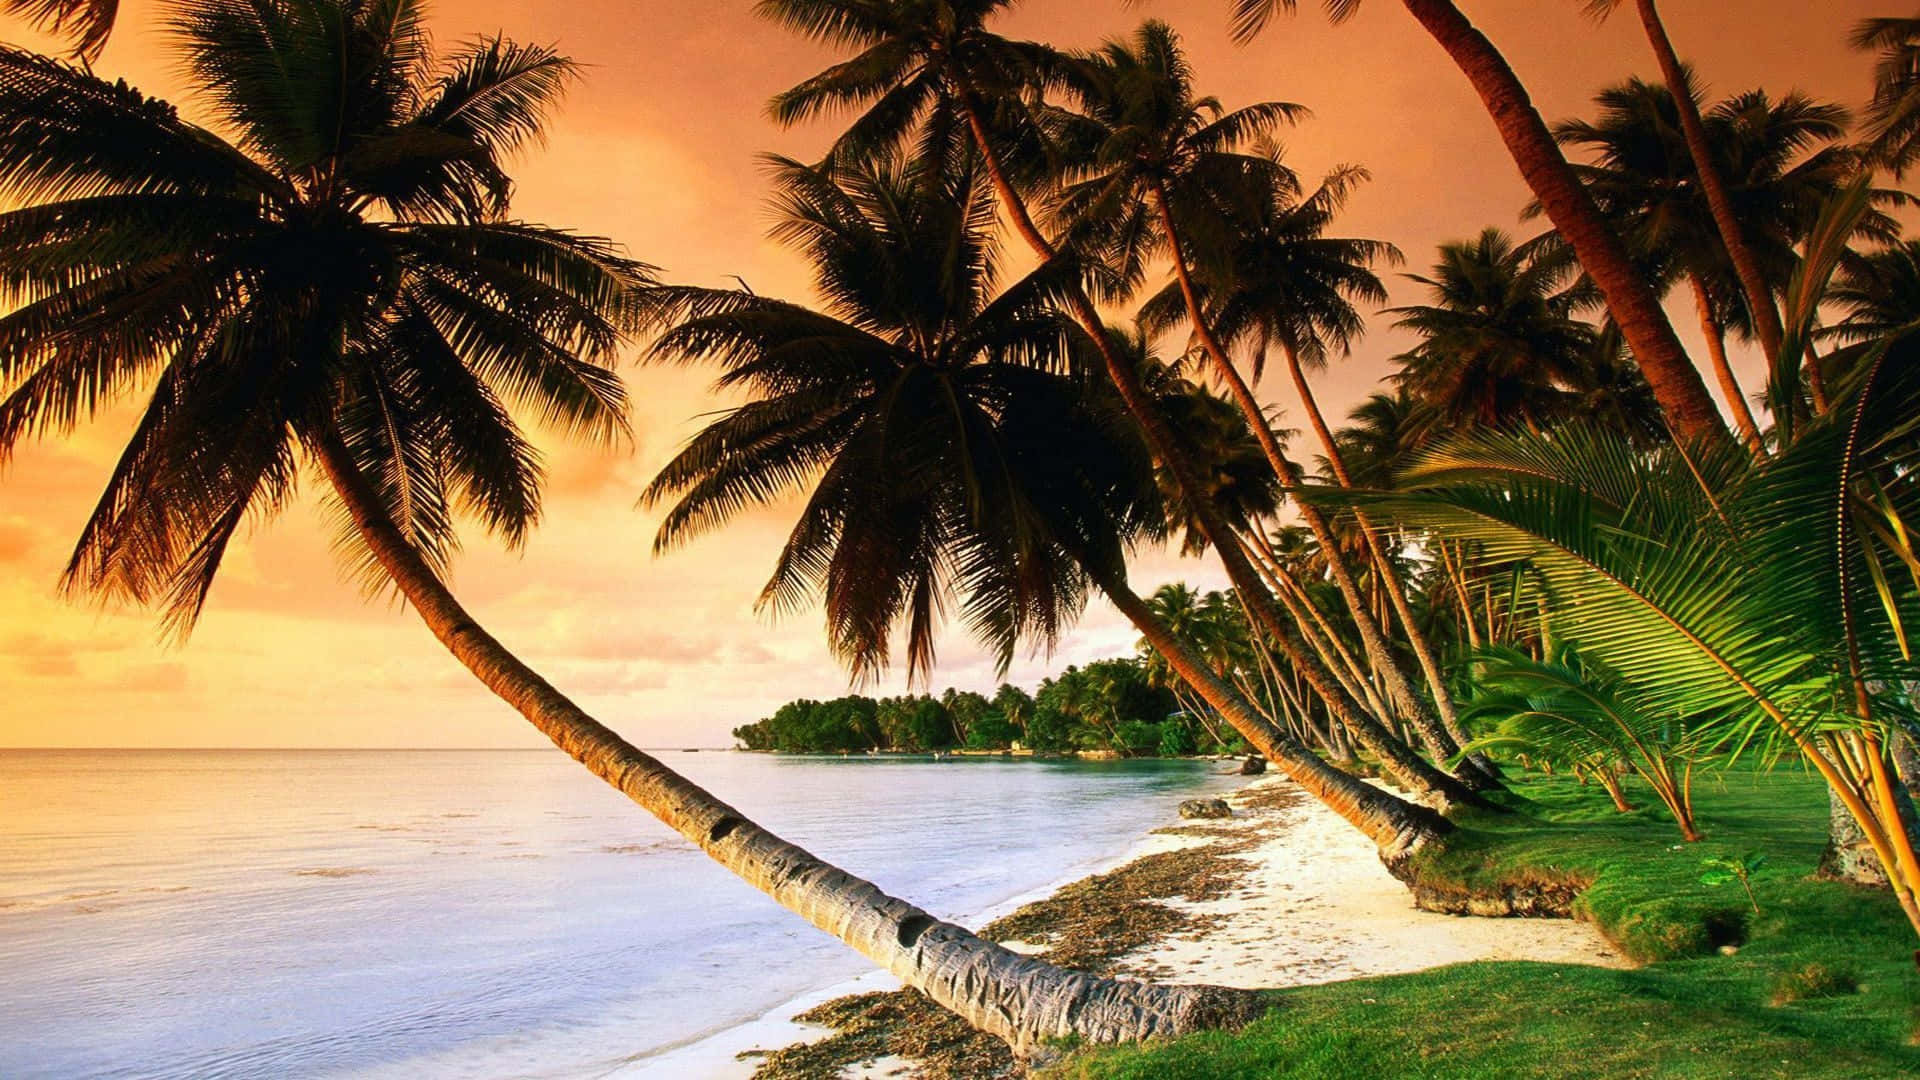 Leaning Palm Trees Beach Wallpaper